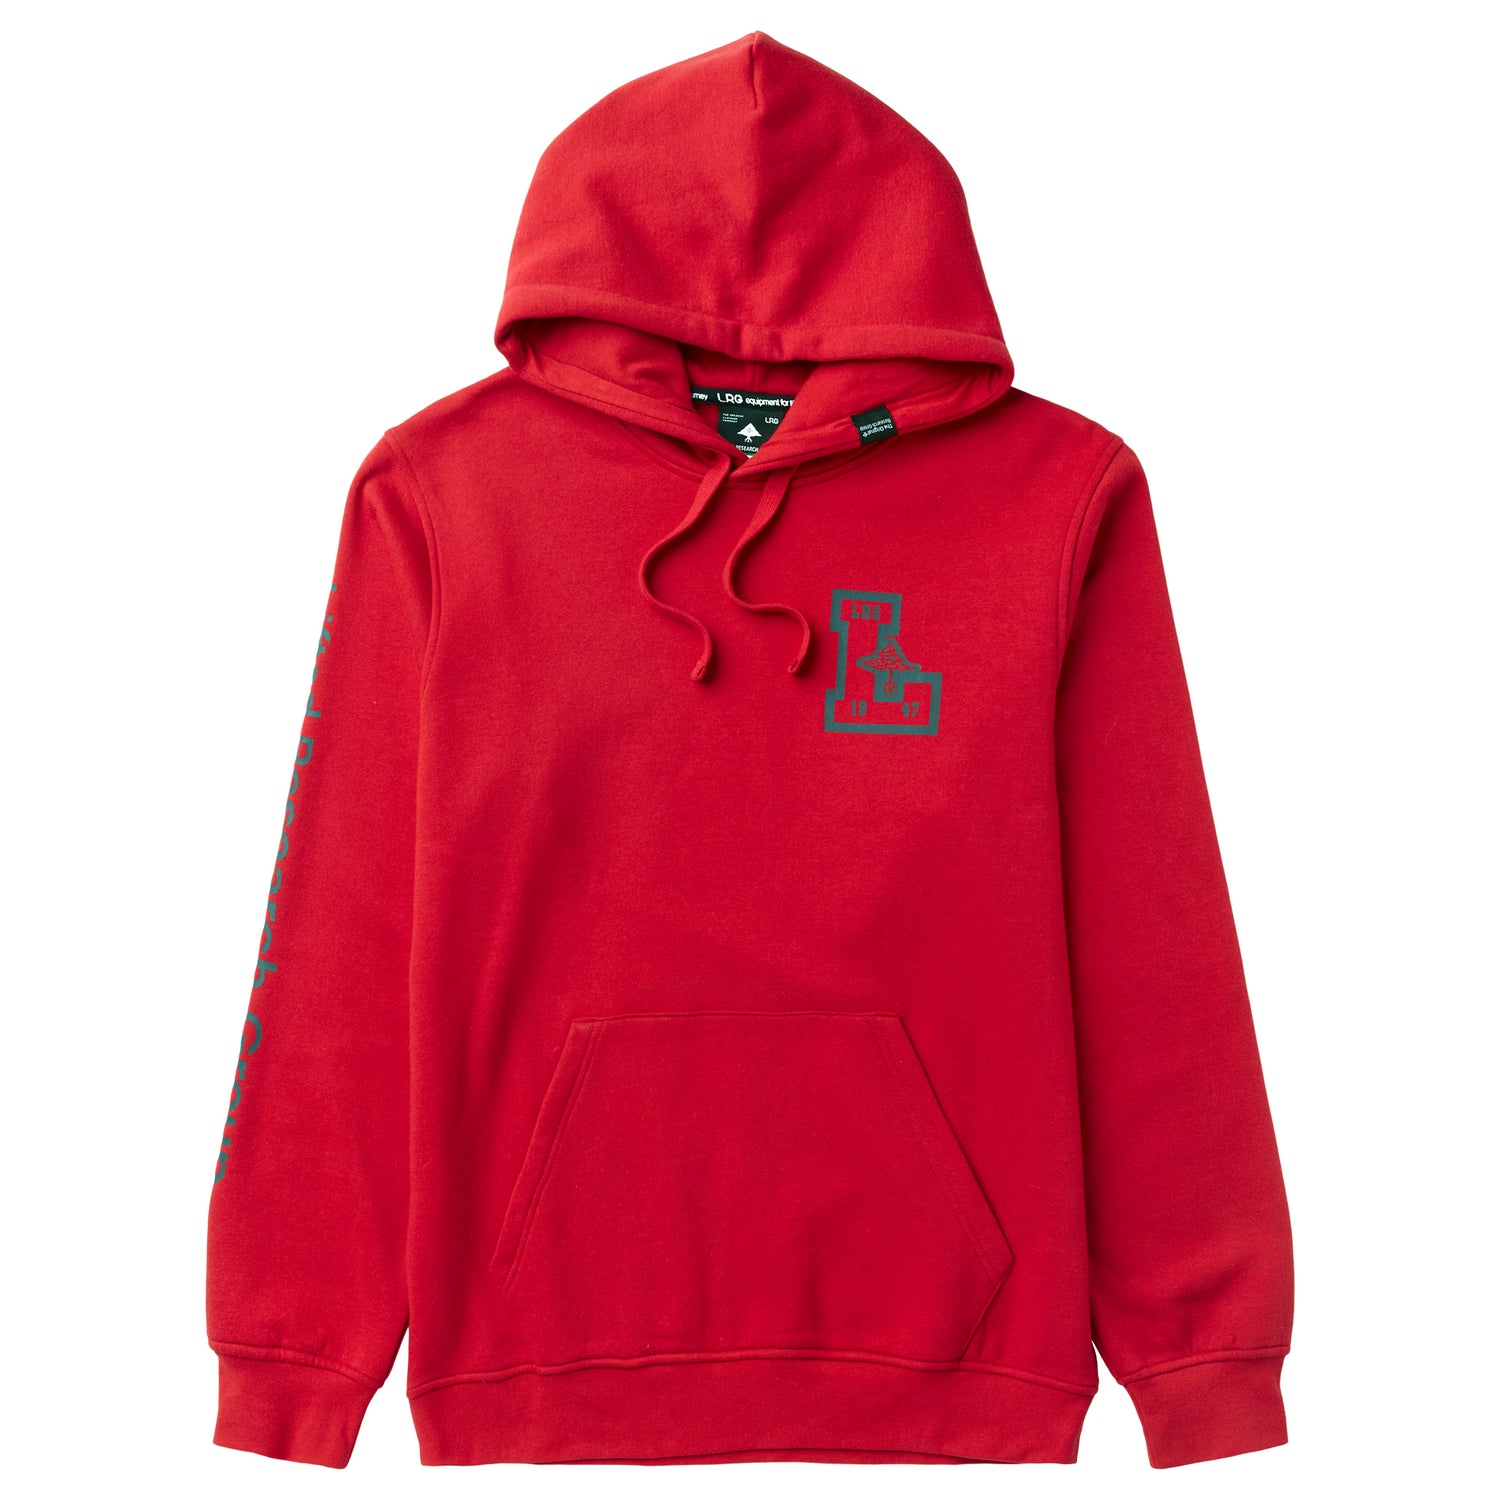 BRIGHTER THAN L PULLOVER HOODIE - RED